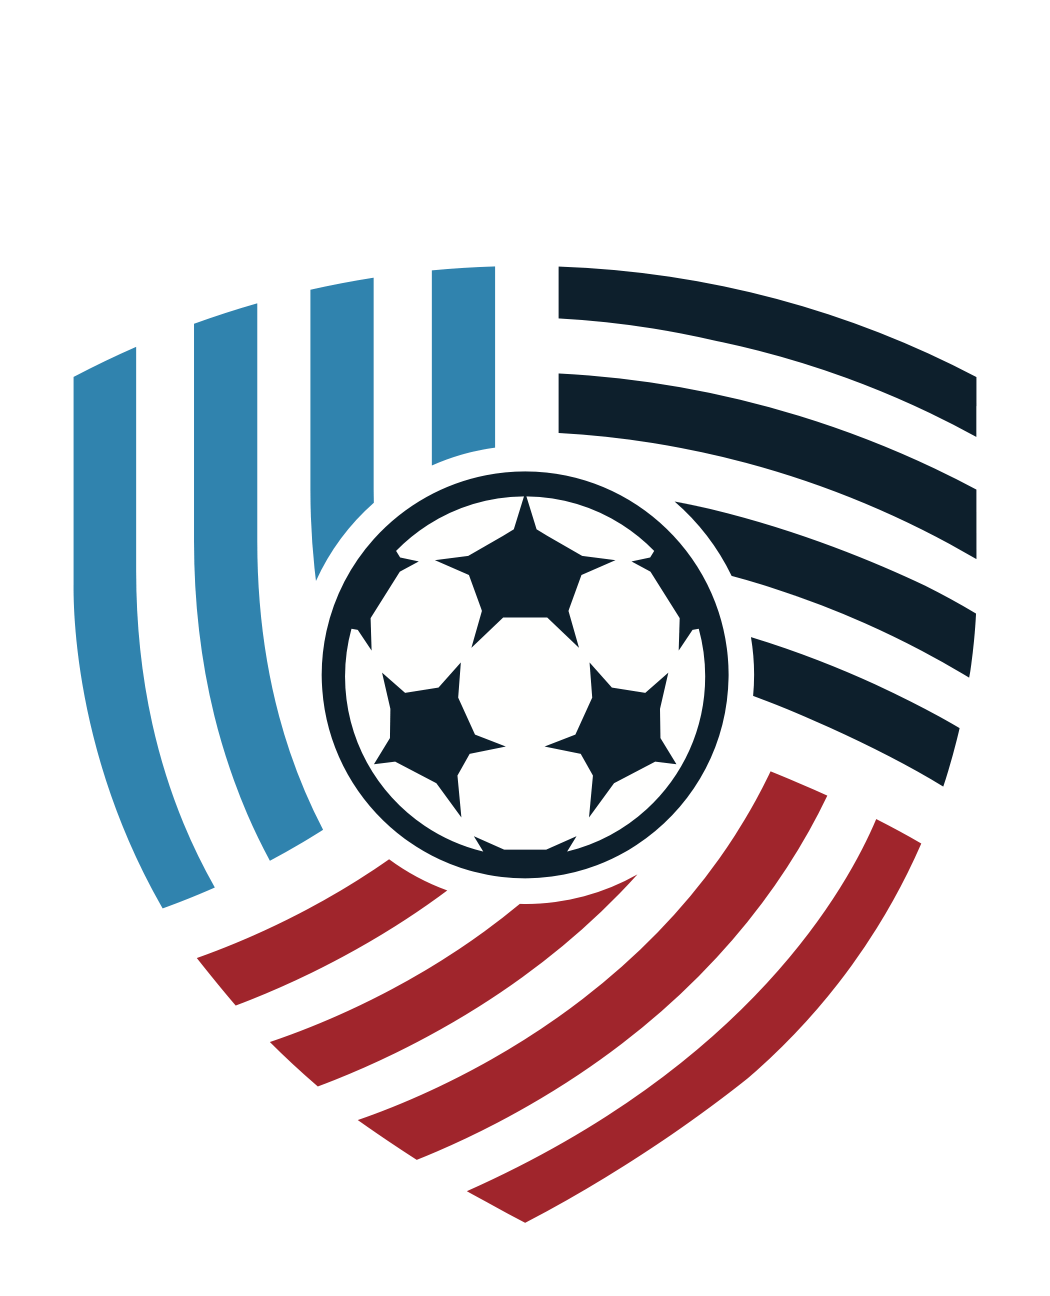 Ball Logo - The NSCAA is now United Soccer Coaches